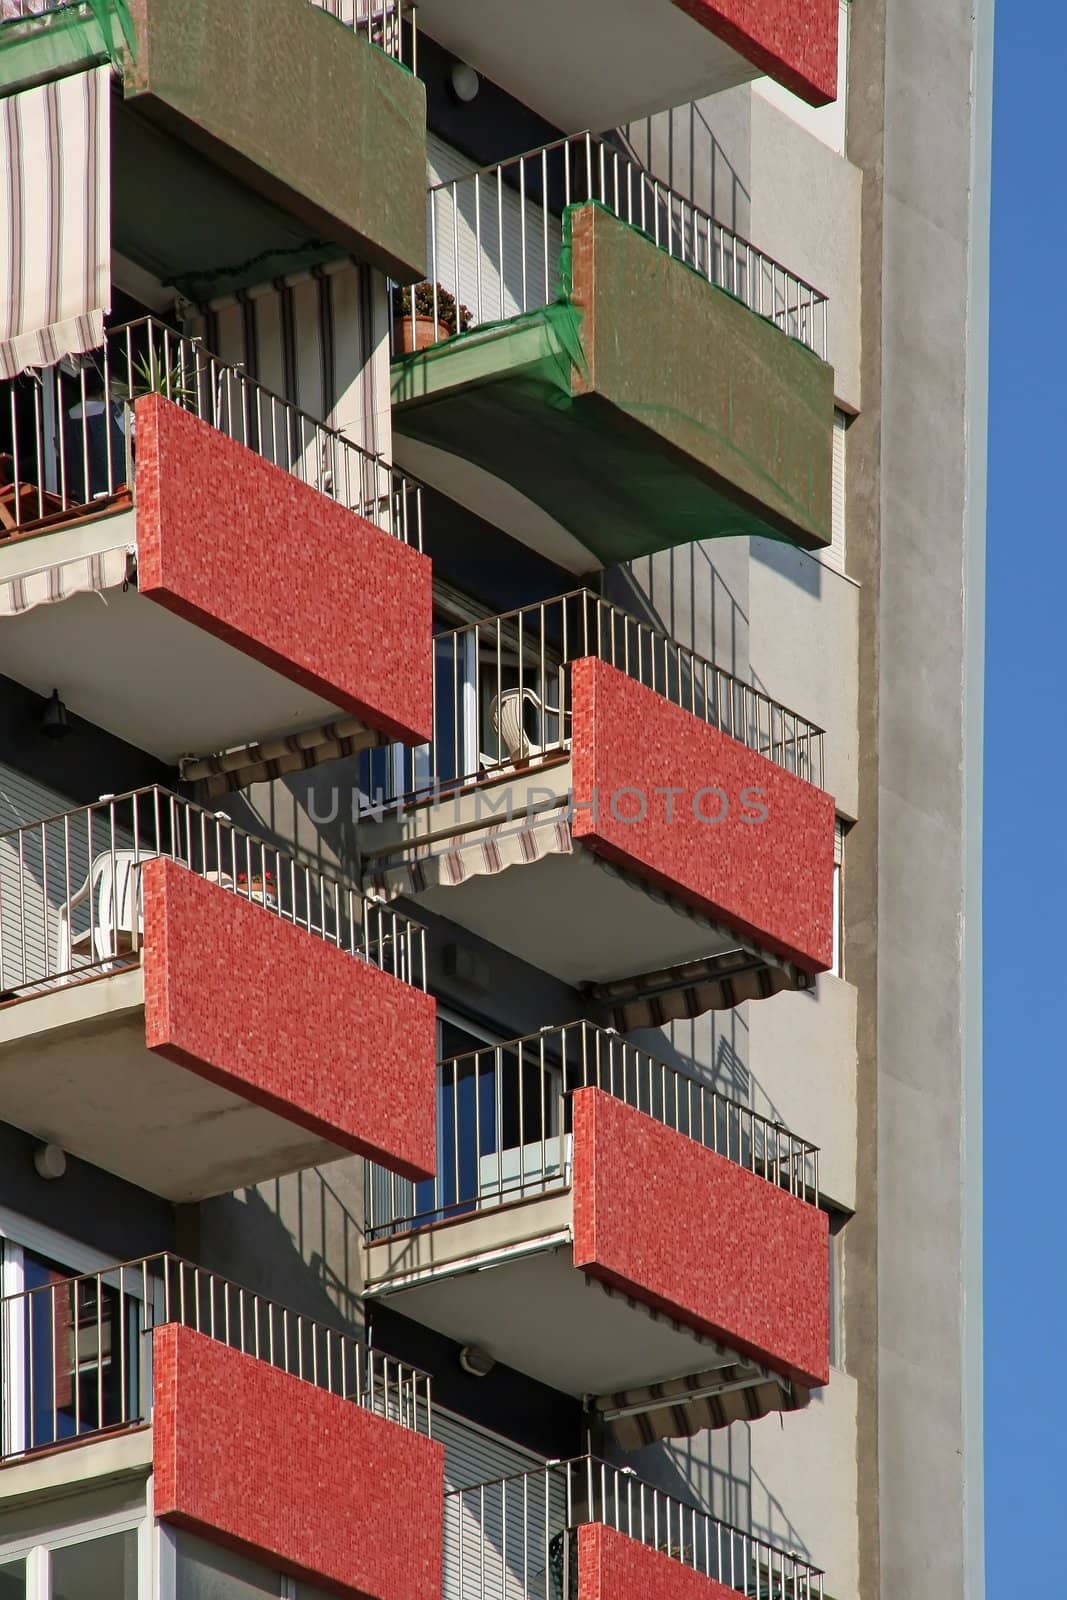 building and balconies, typical of the 1970 (Spain Europe)